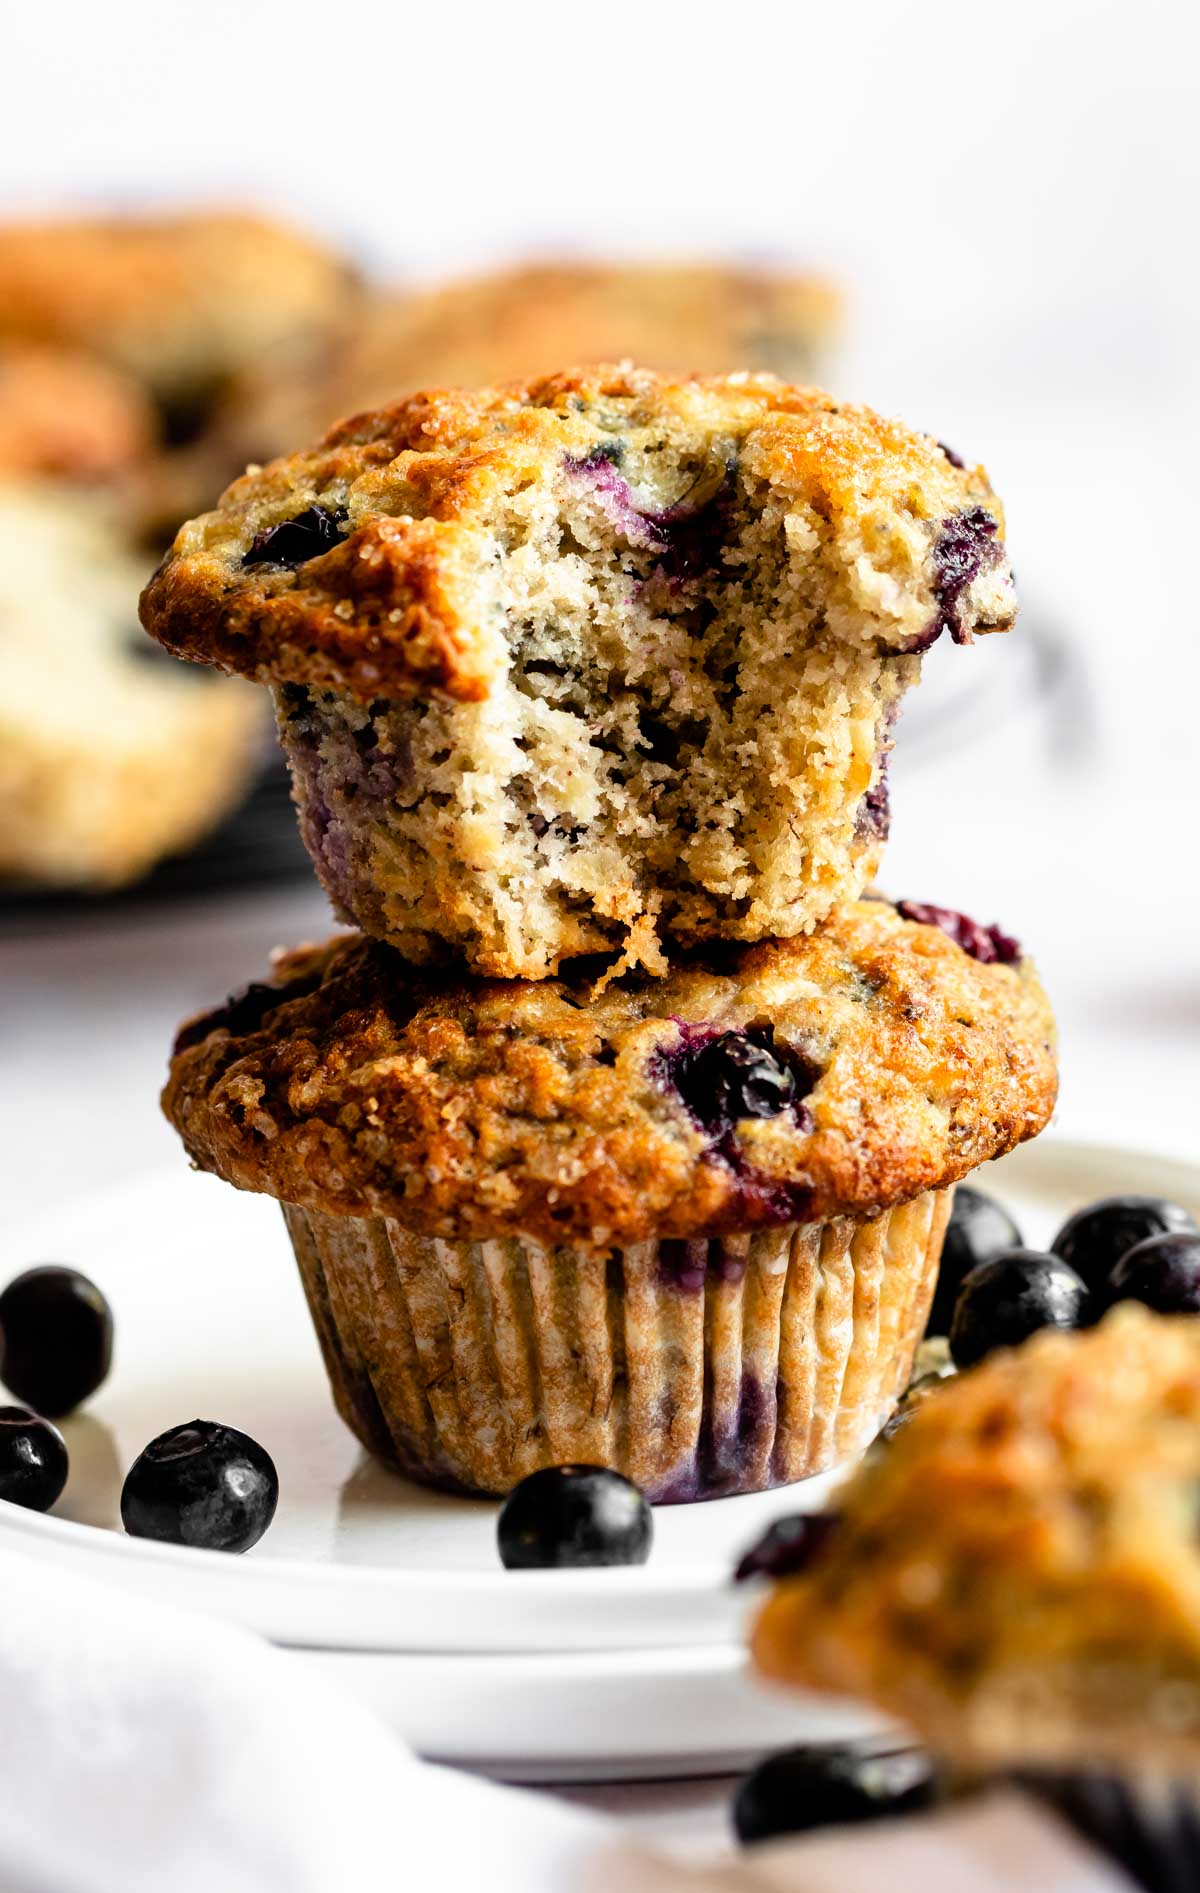 Stack of two muffins with a bite missing from the top one.